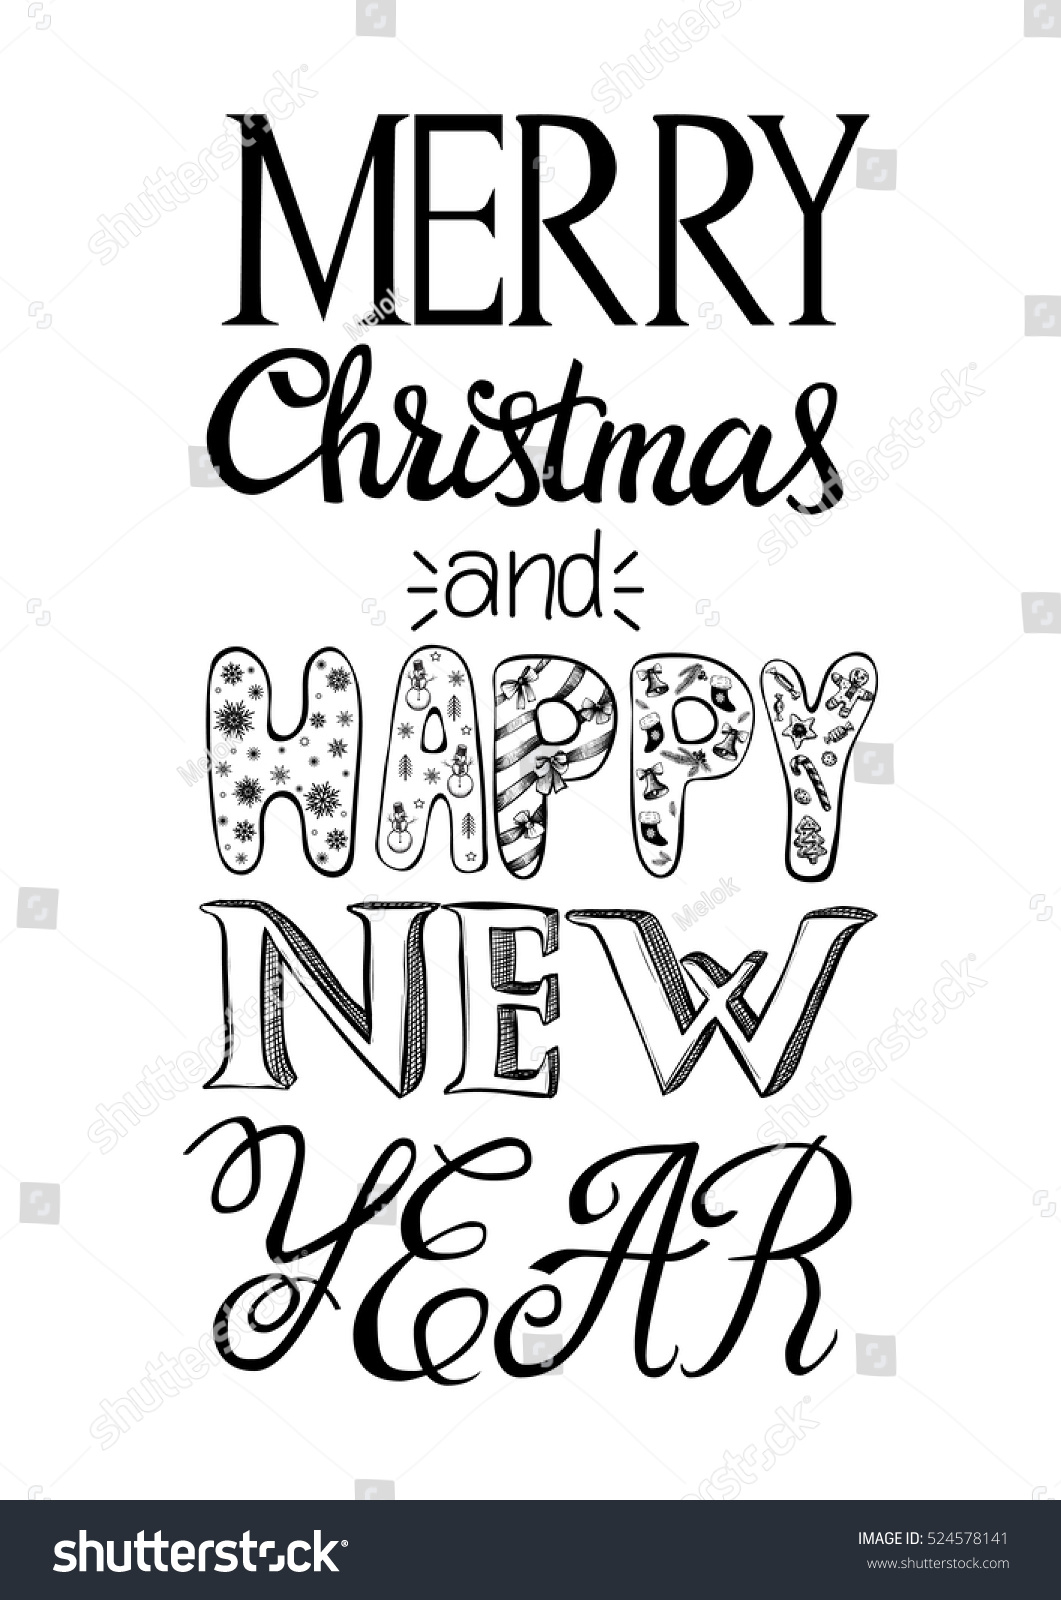 Merry Christmas and Happy New Year greeting card Christmas hand drawn postcard different